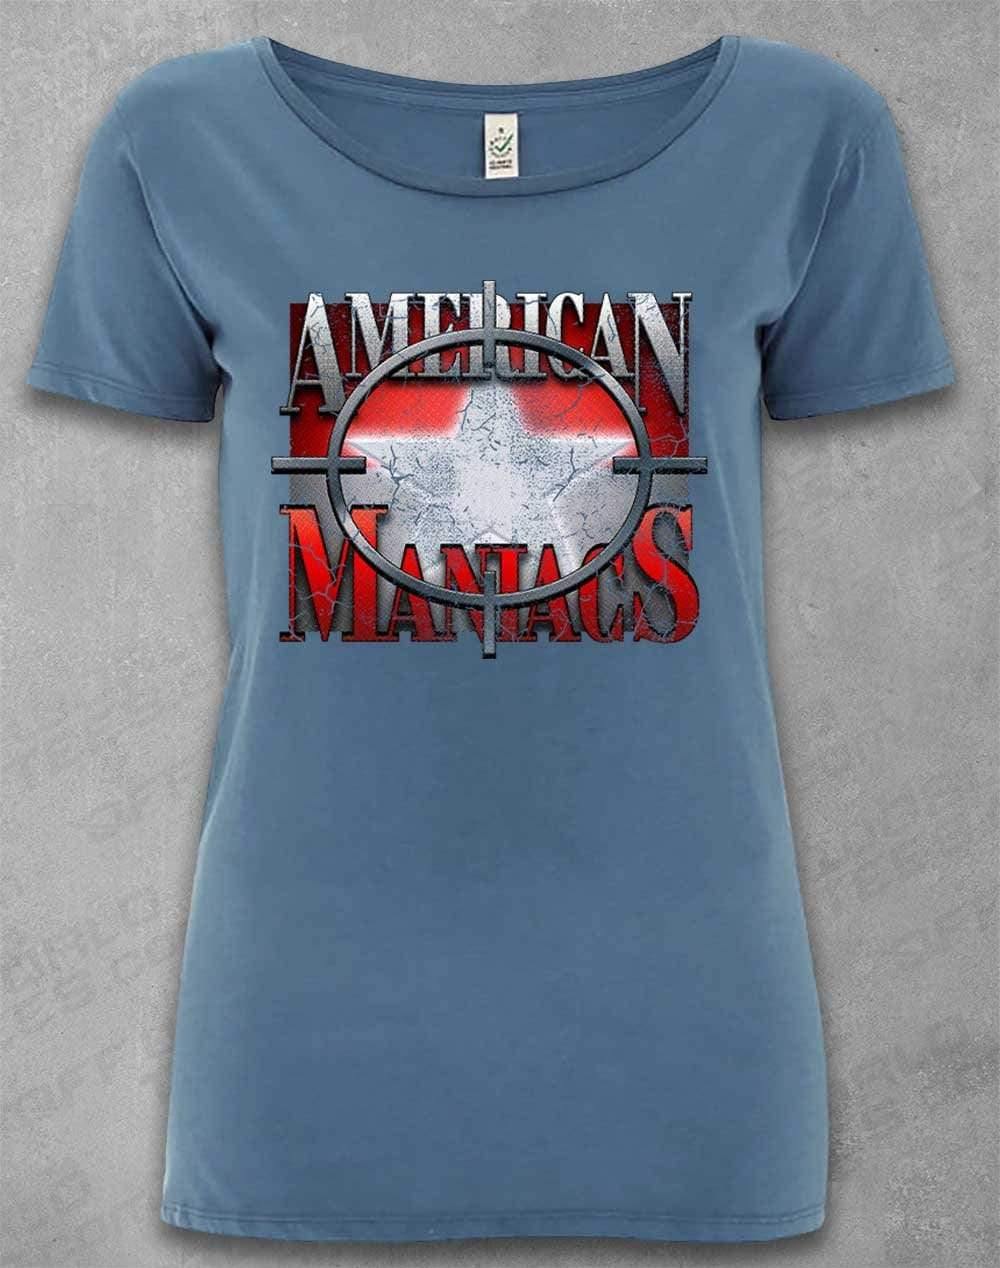 DELUXE American Maniacs - Organic Scoop Neck T-Shirt 8-10 / Faded Denim  - Off World Tees